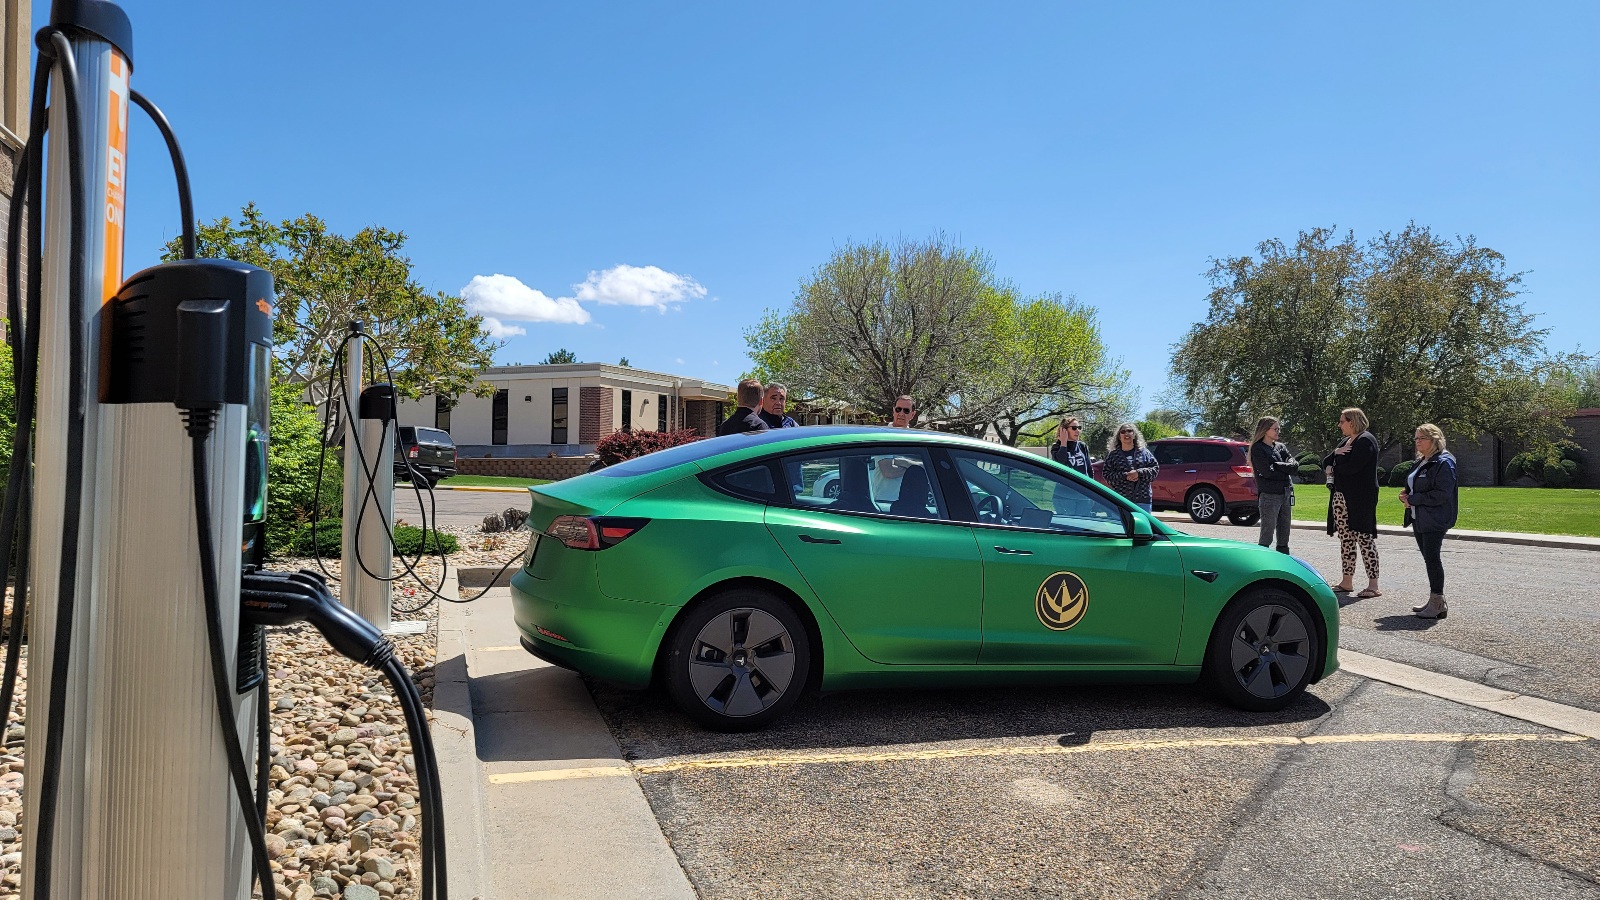 Otero College Electric Vehicle Charging Station Ribbon Cutting Ceremony 